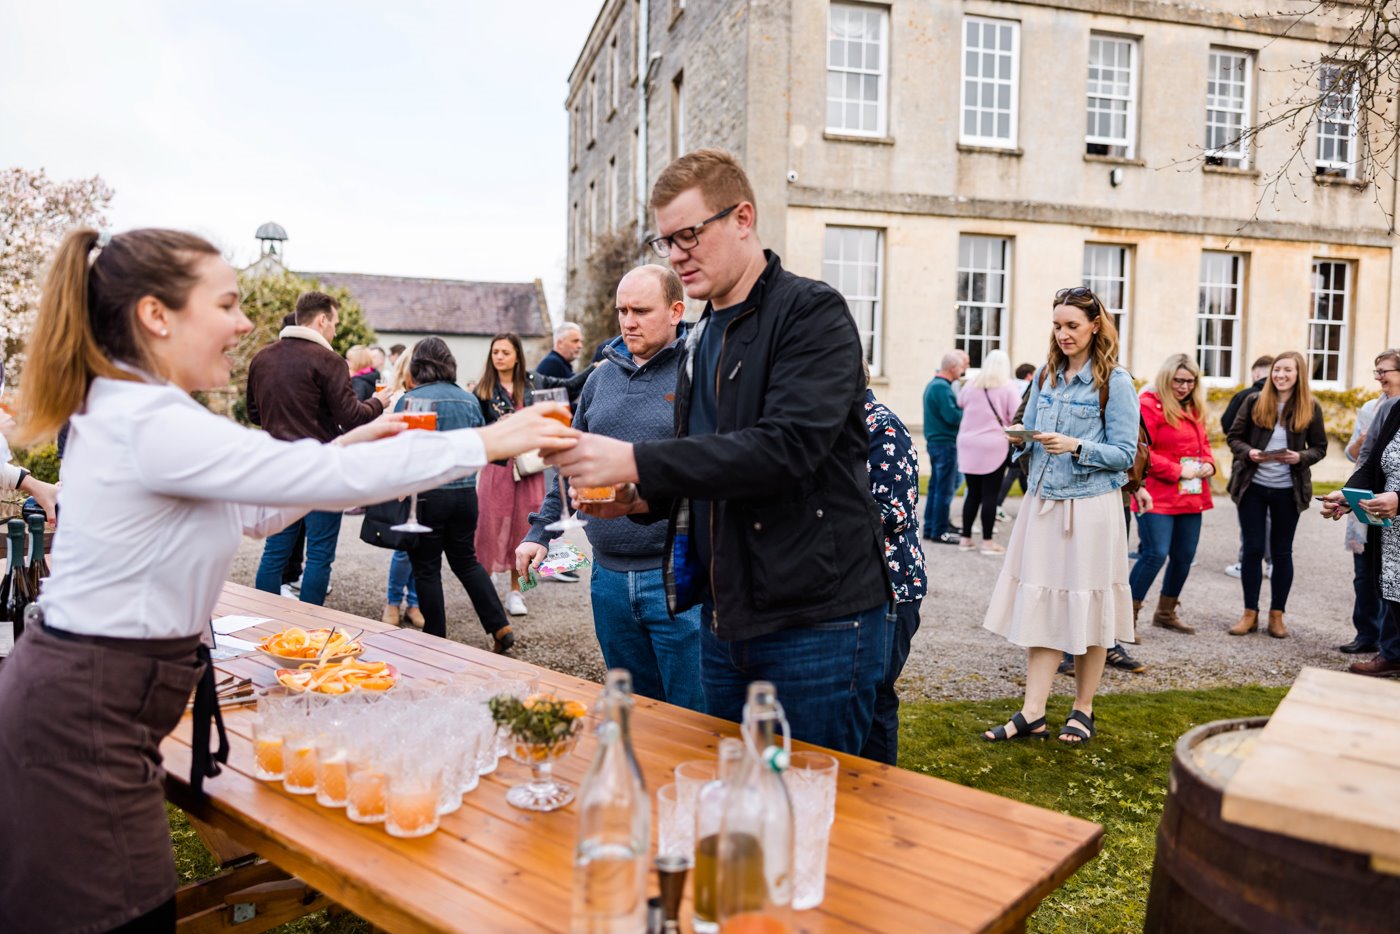 Team E hand out cocktails to guests as they arrive at wild wedding fair with festival feel in gloucestershire